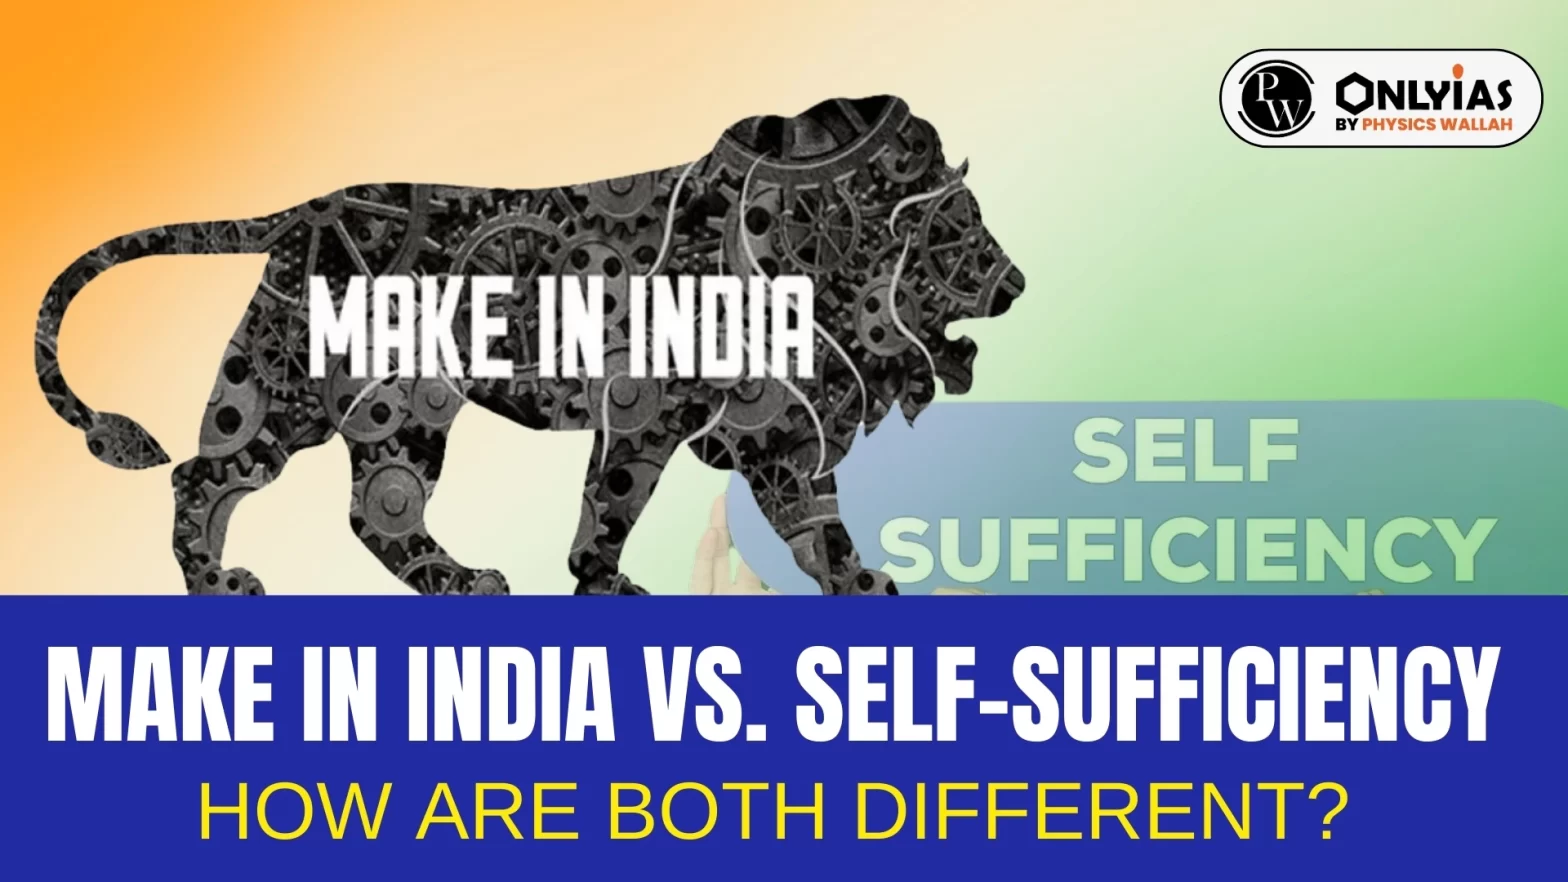 Make in India Vs Self-Sufficiency: How Are Both Different?